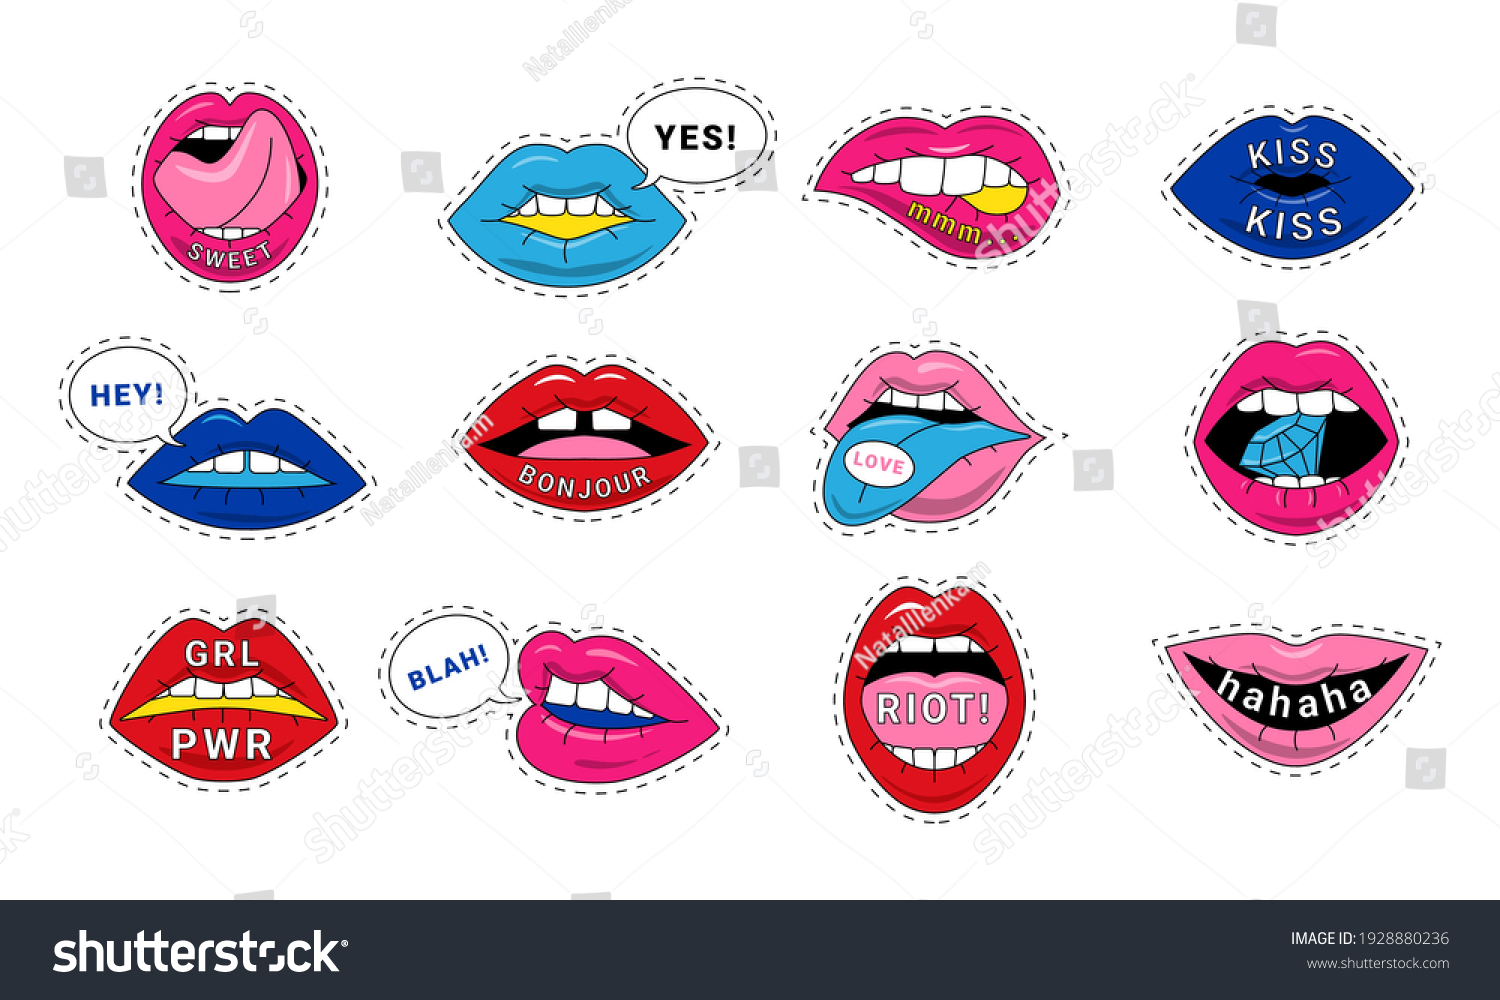 Woman S Lips Stickers Sexy Kiss Stock Vector Royalty Free